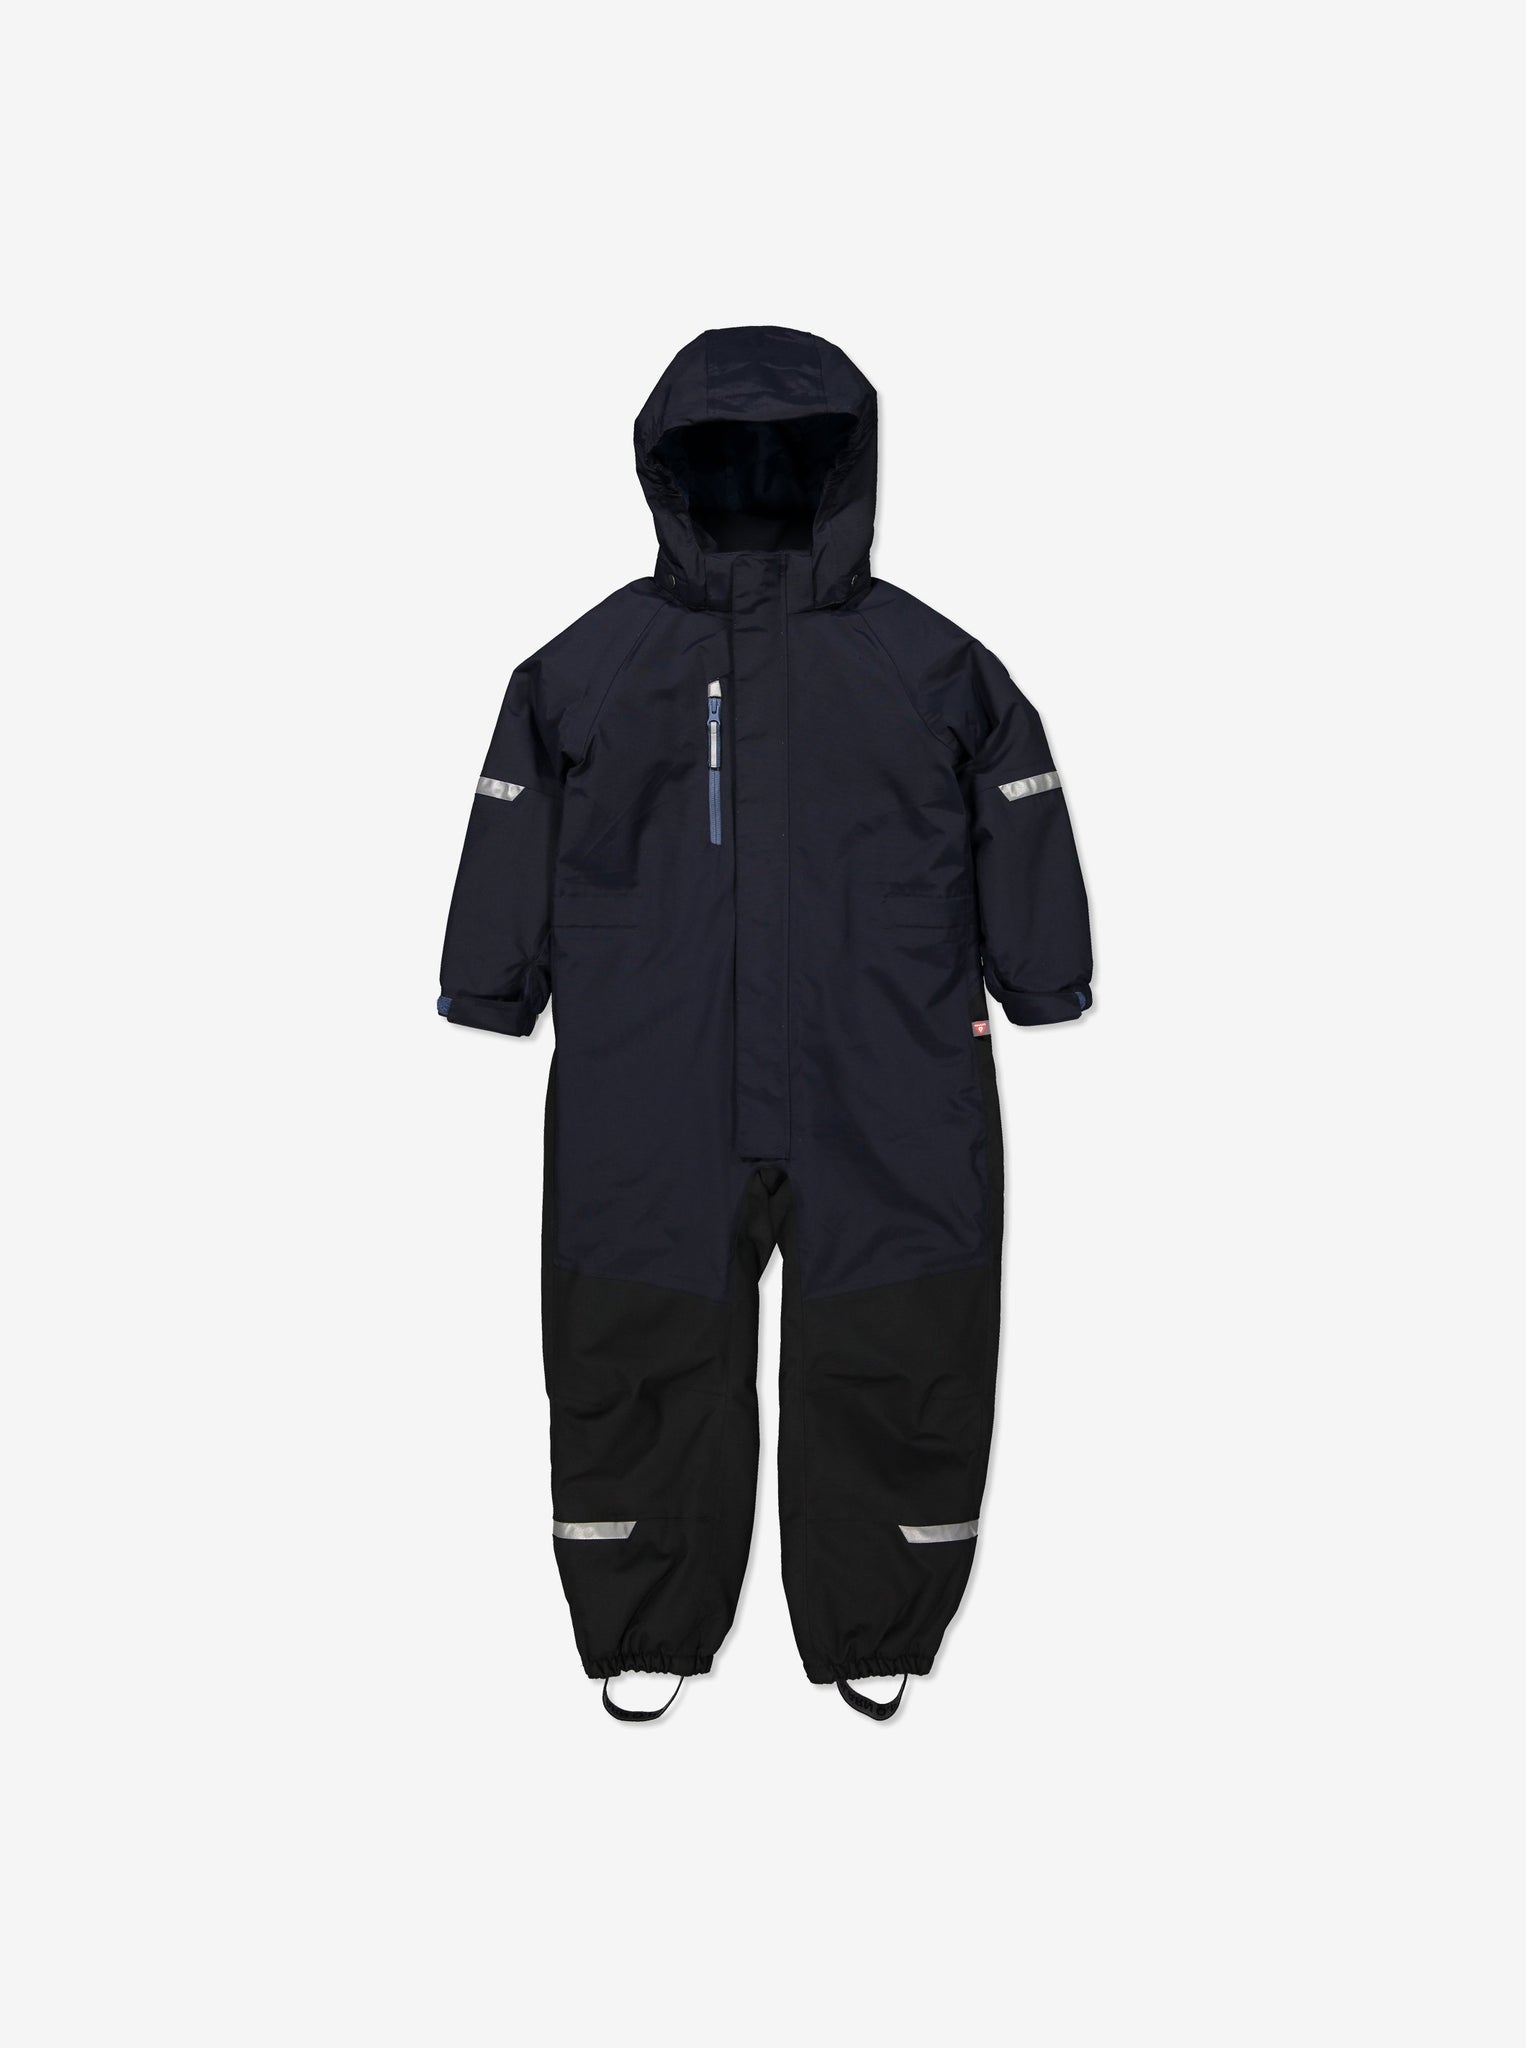 Padded Winter Kids Overall-1-8y-Navy-Boy